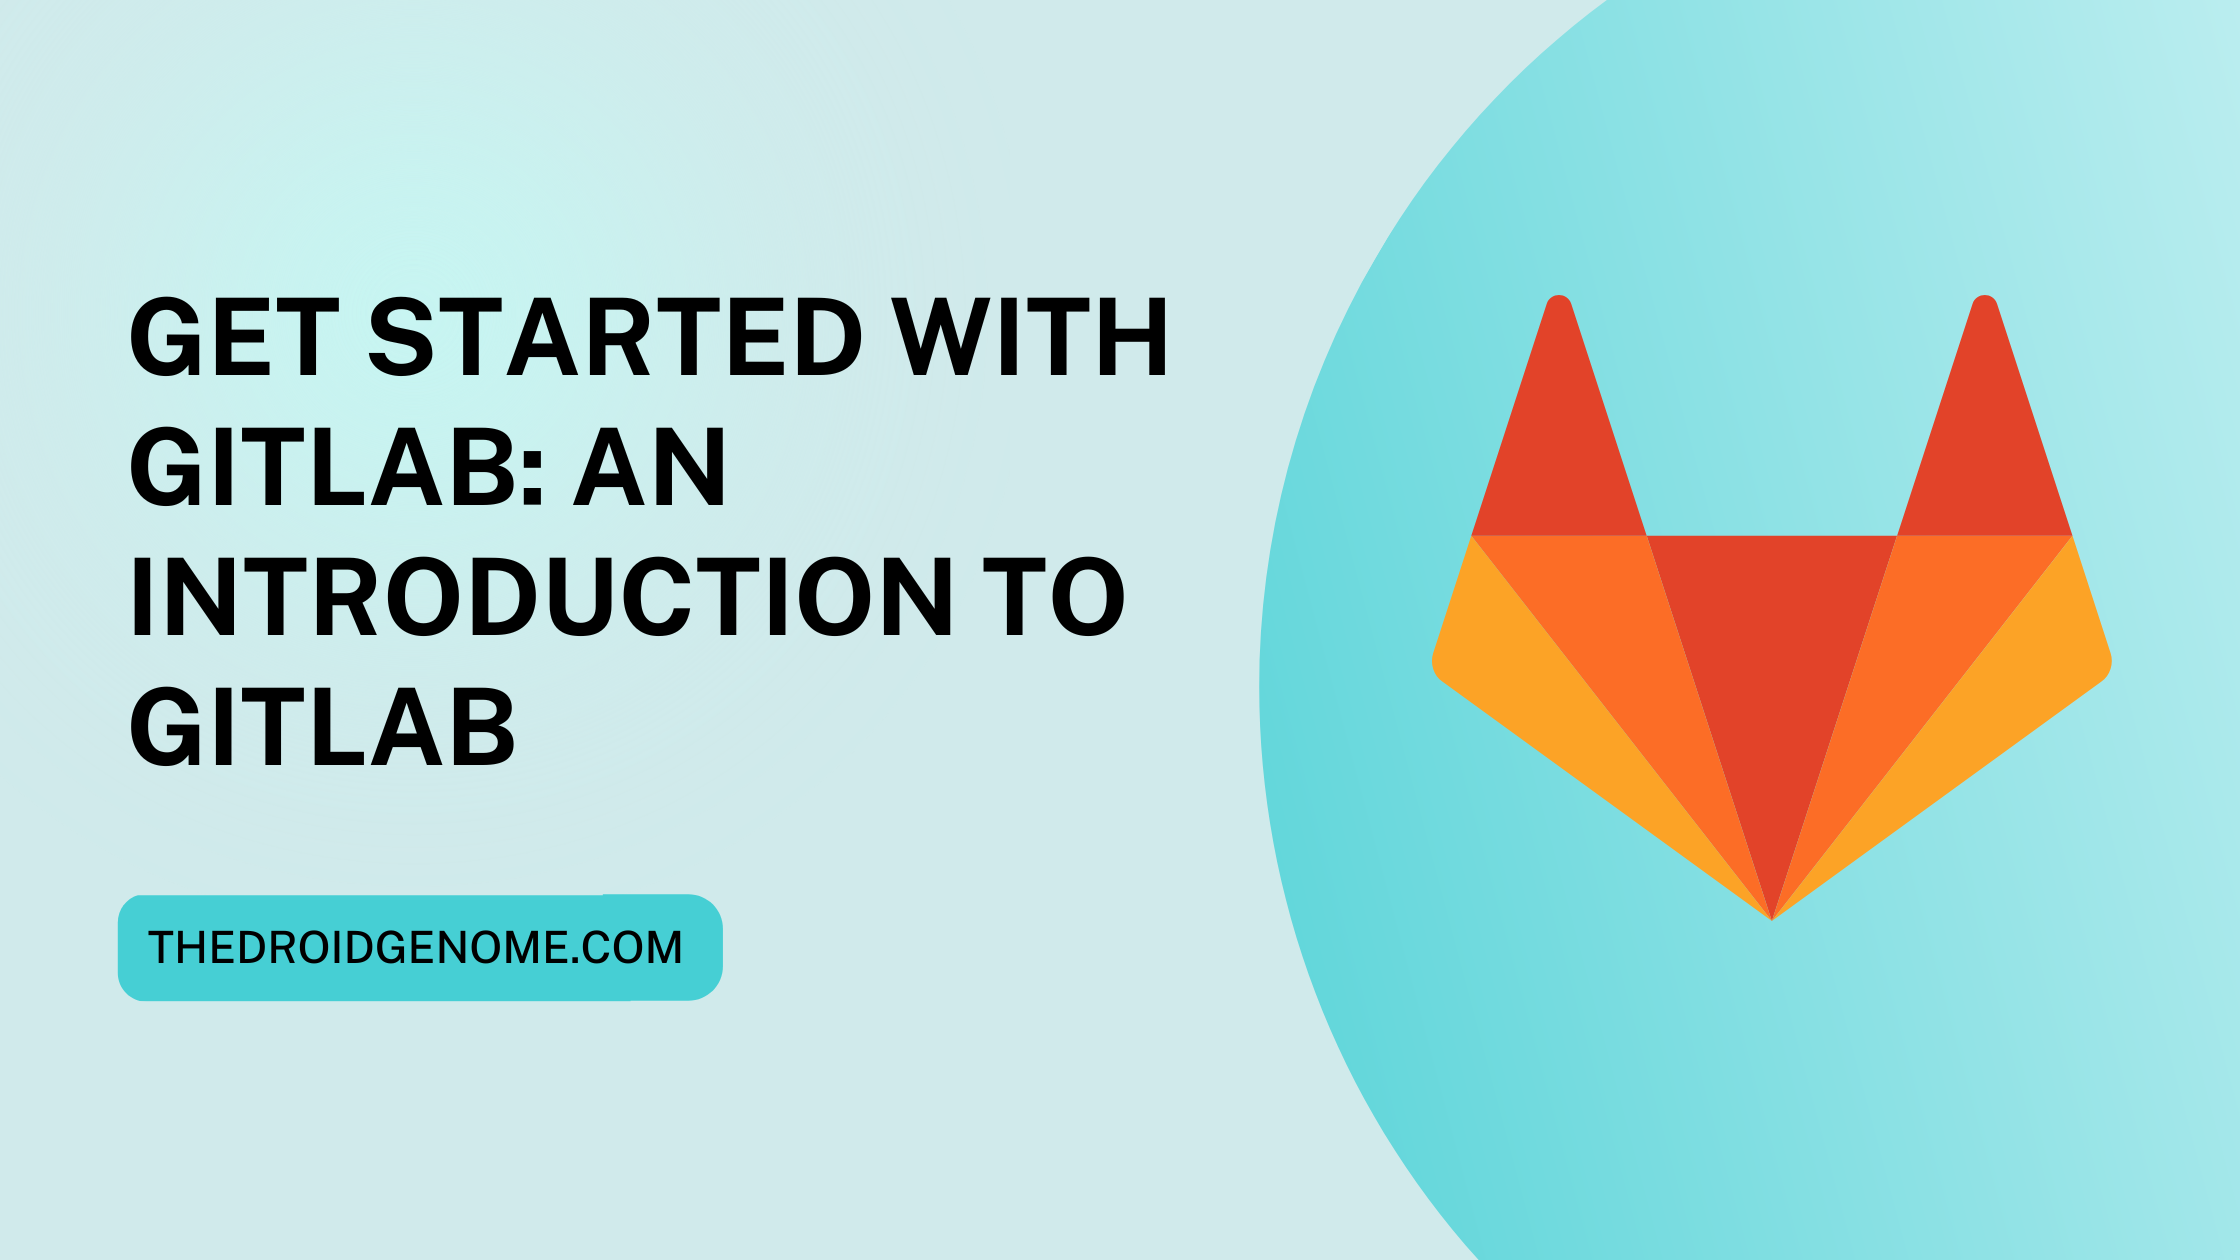 An Introduction to GitLab